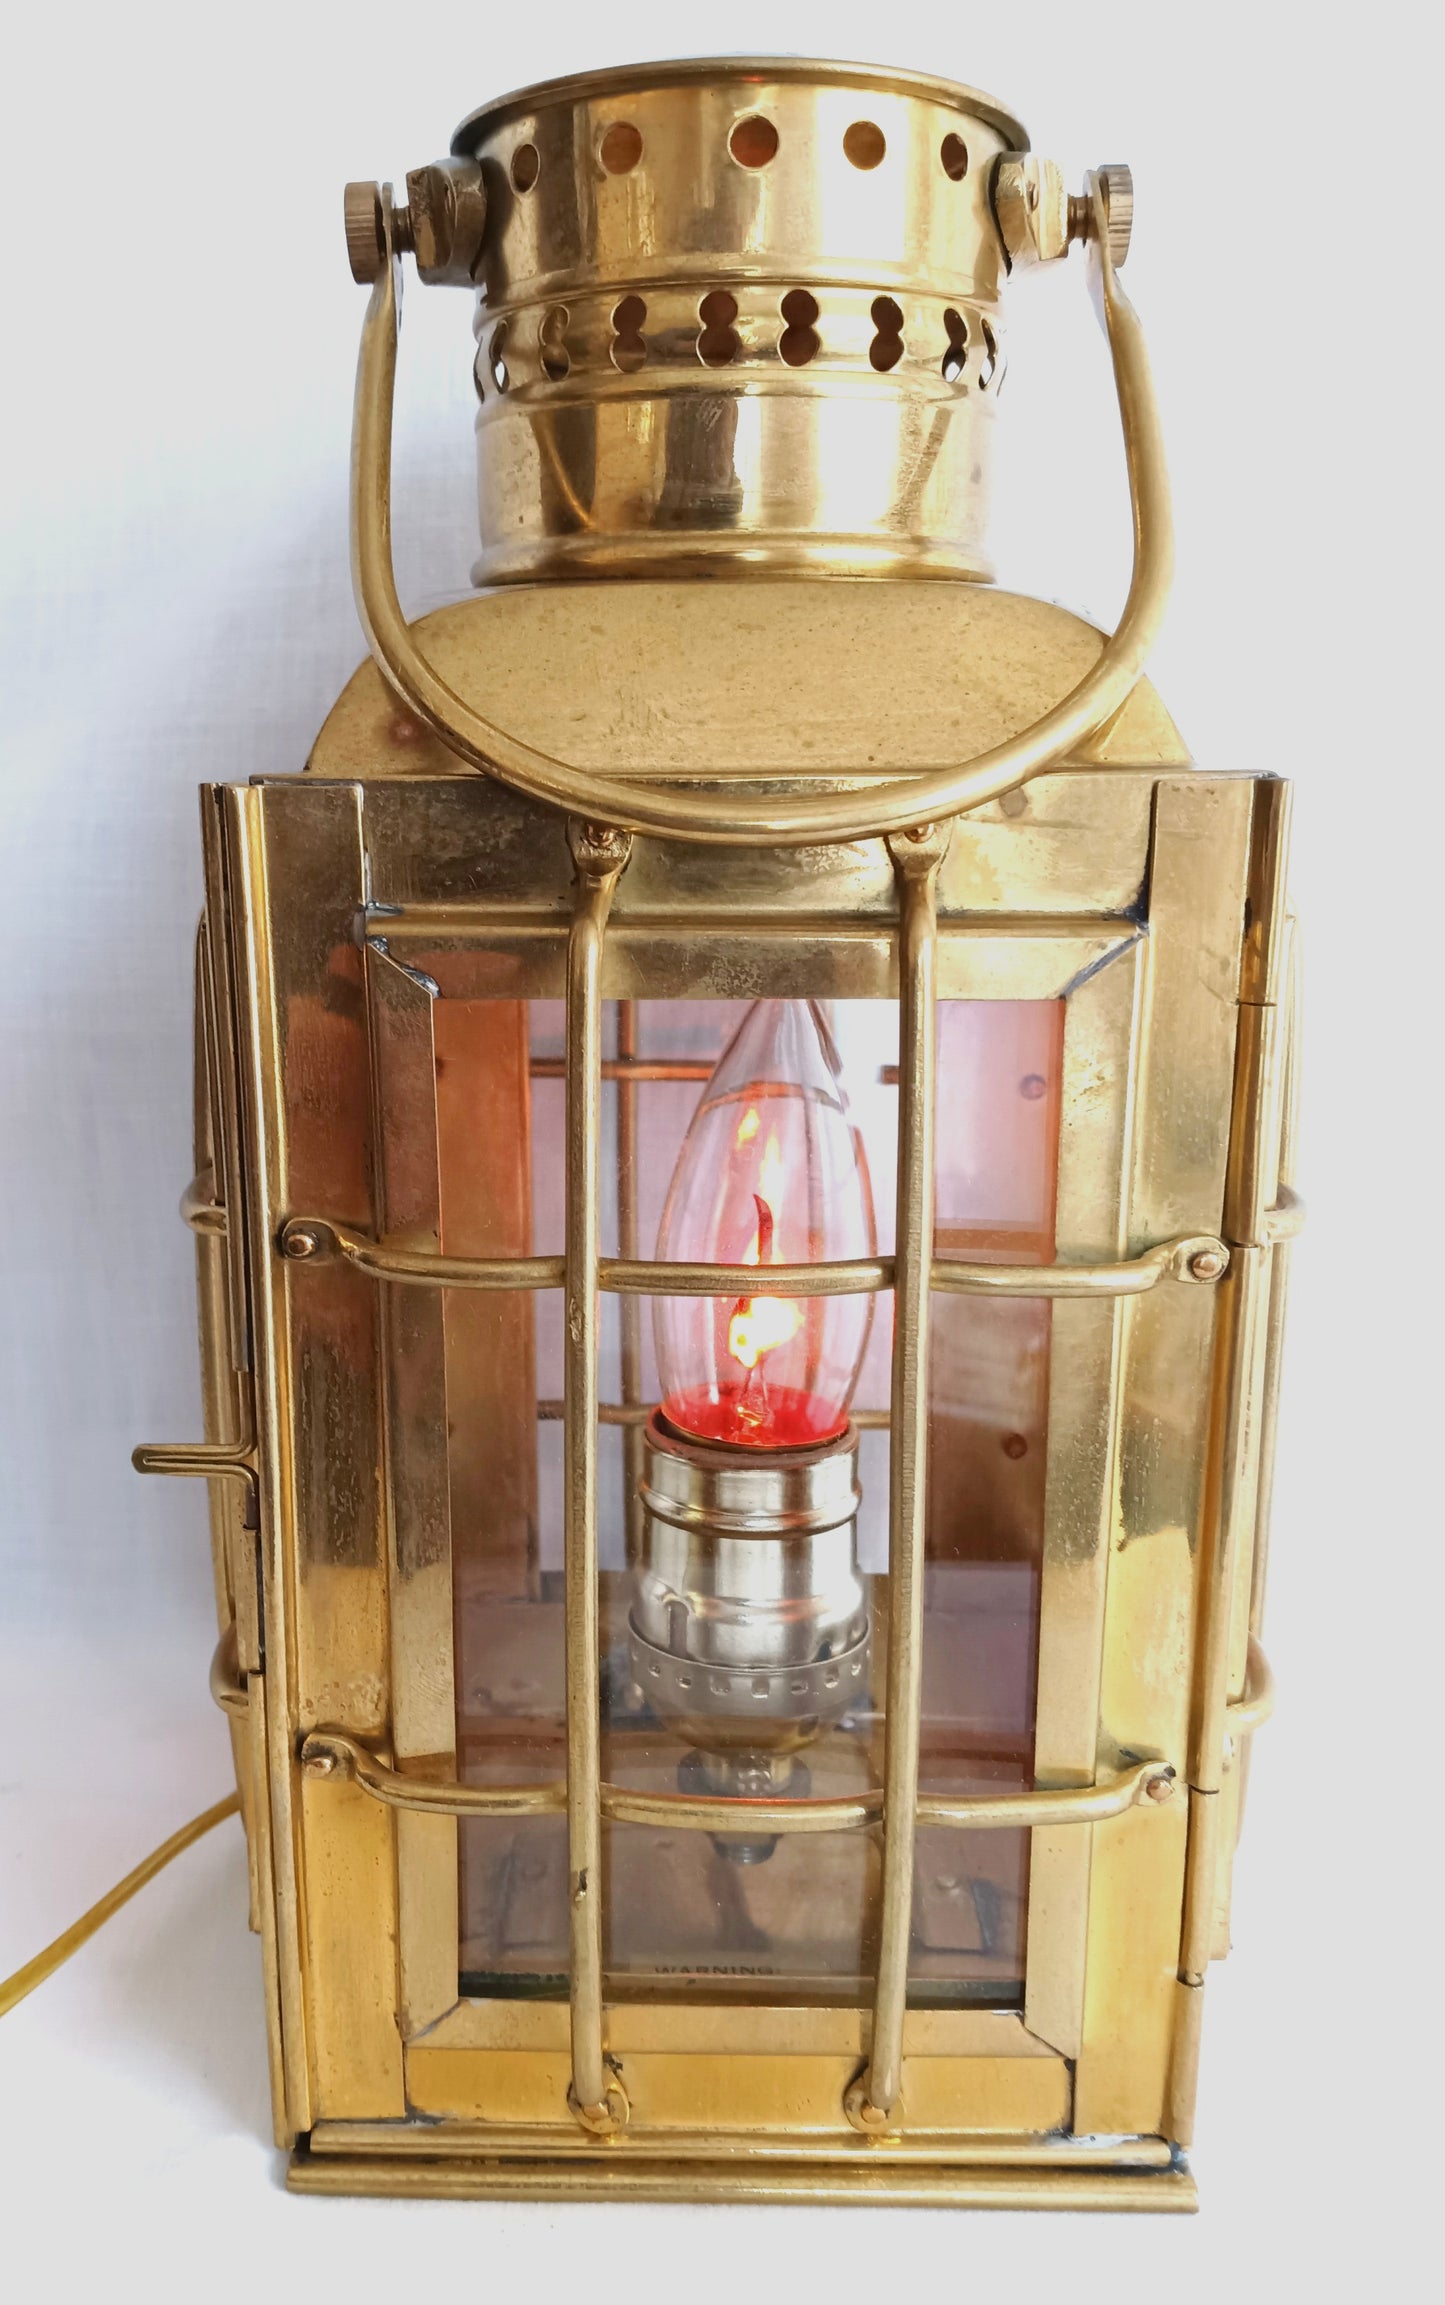 Vintage Vermont Lantern Co. Solid Brass Nautical Electric Table/Hanging Lamp In Cord Switch Marine Light Fixture Bar Boat Coastal Home Décor